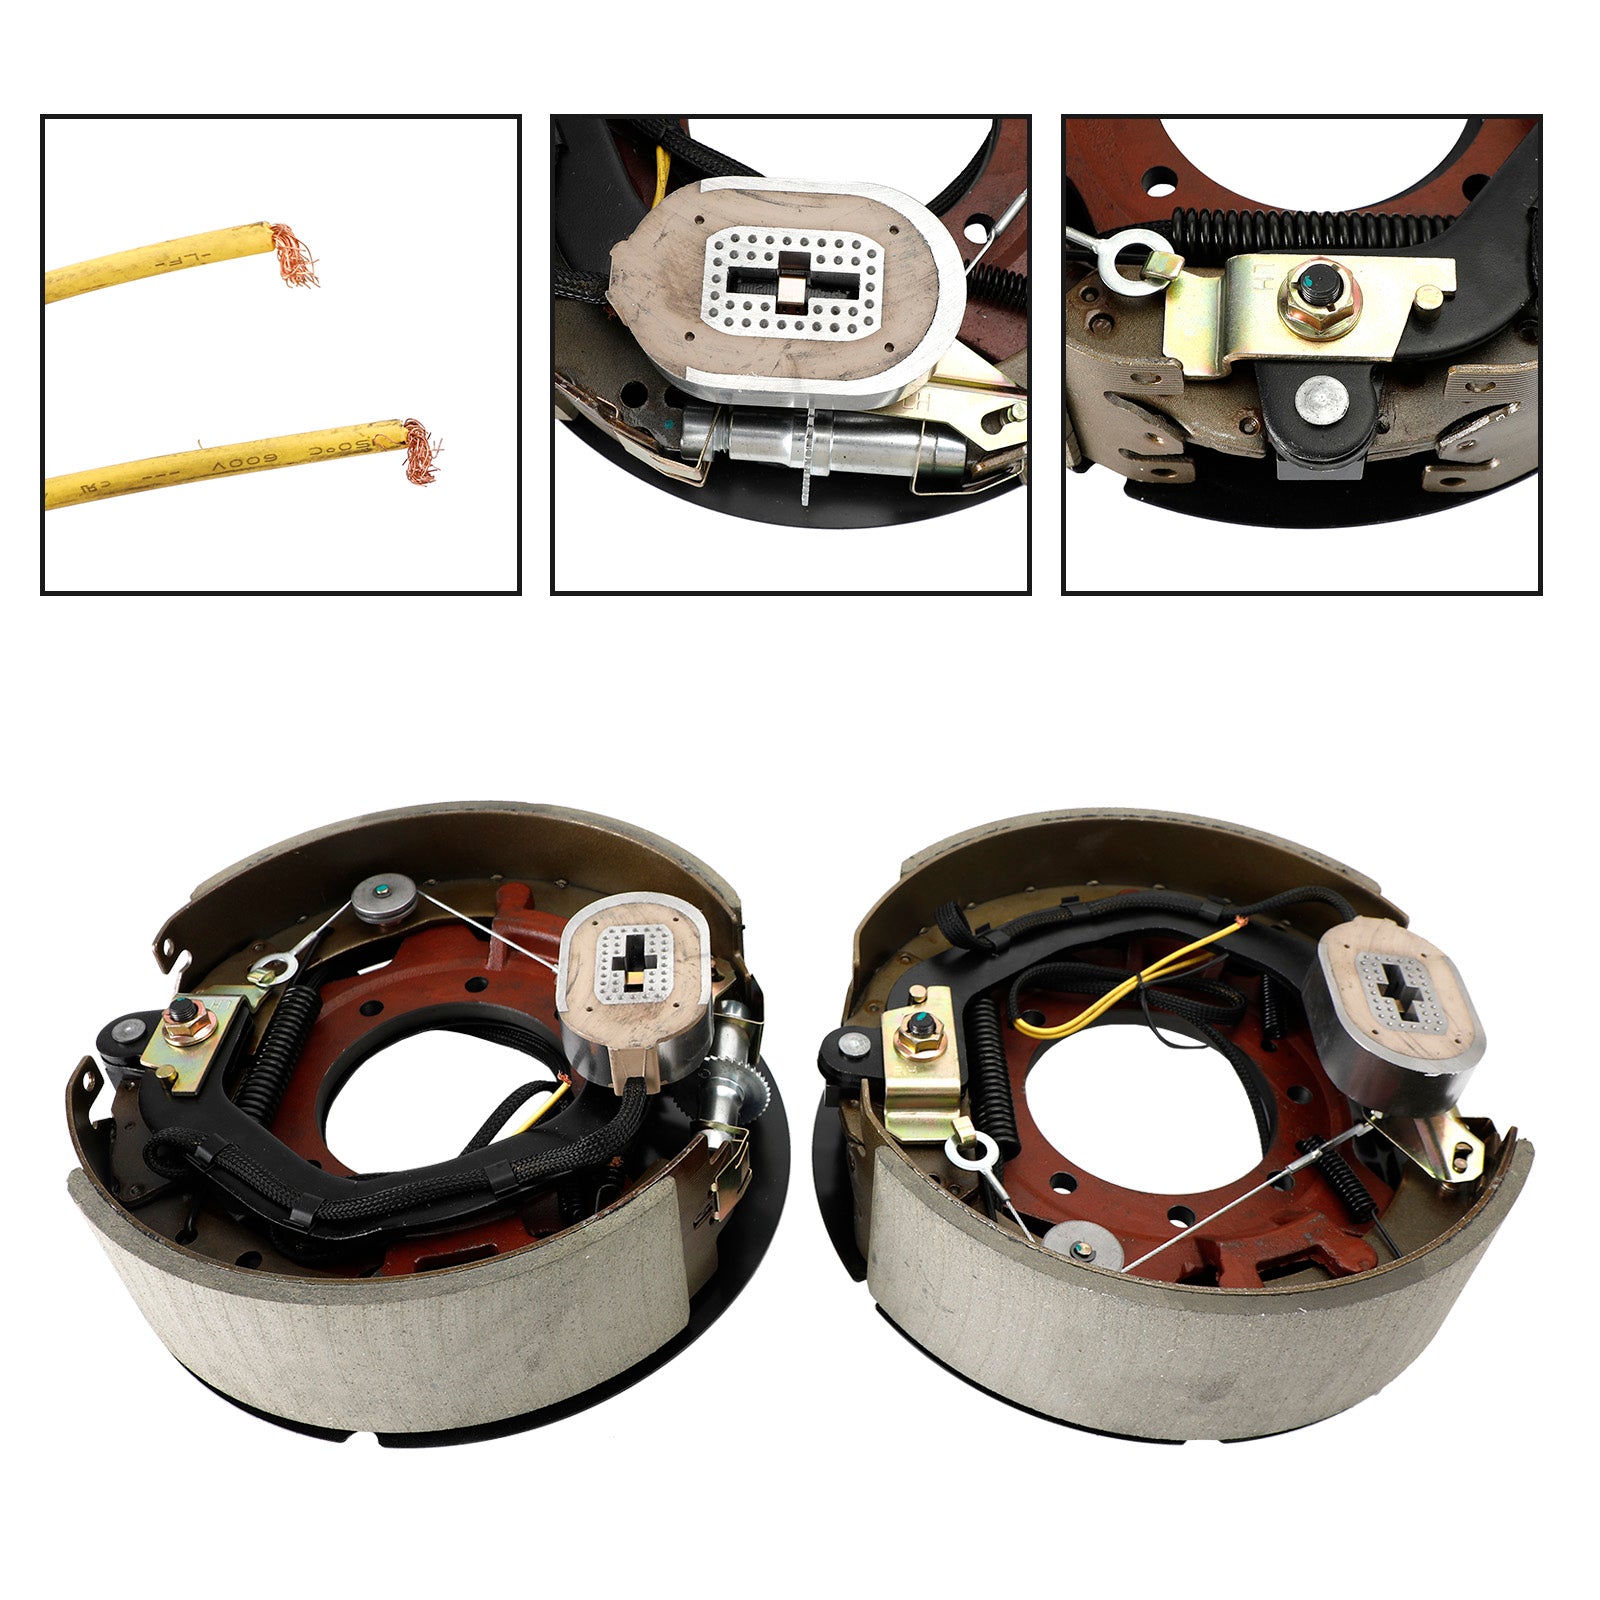 Self-Adjusting 12-1/4" Electric Trailer Brake Kit with Shields - Left/Right Hand for 10K Capacity